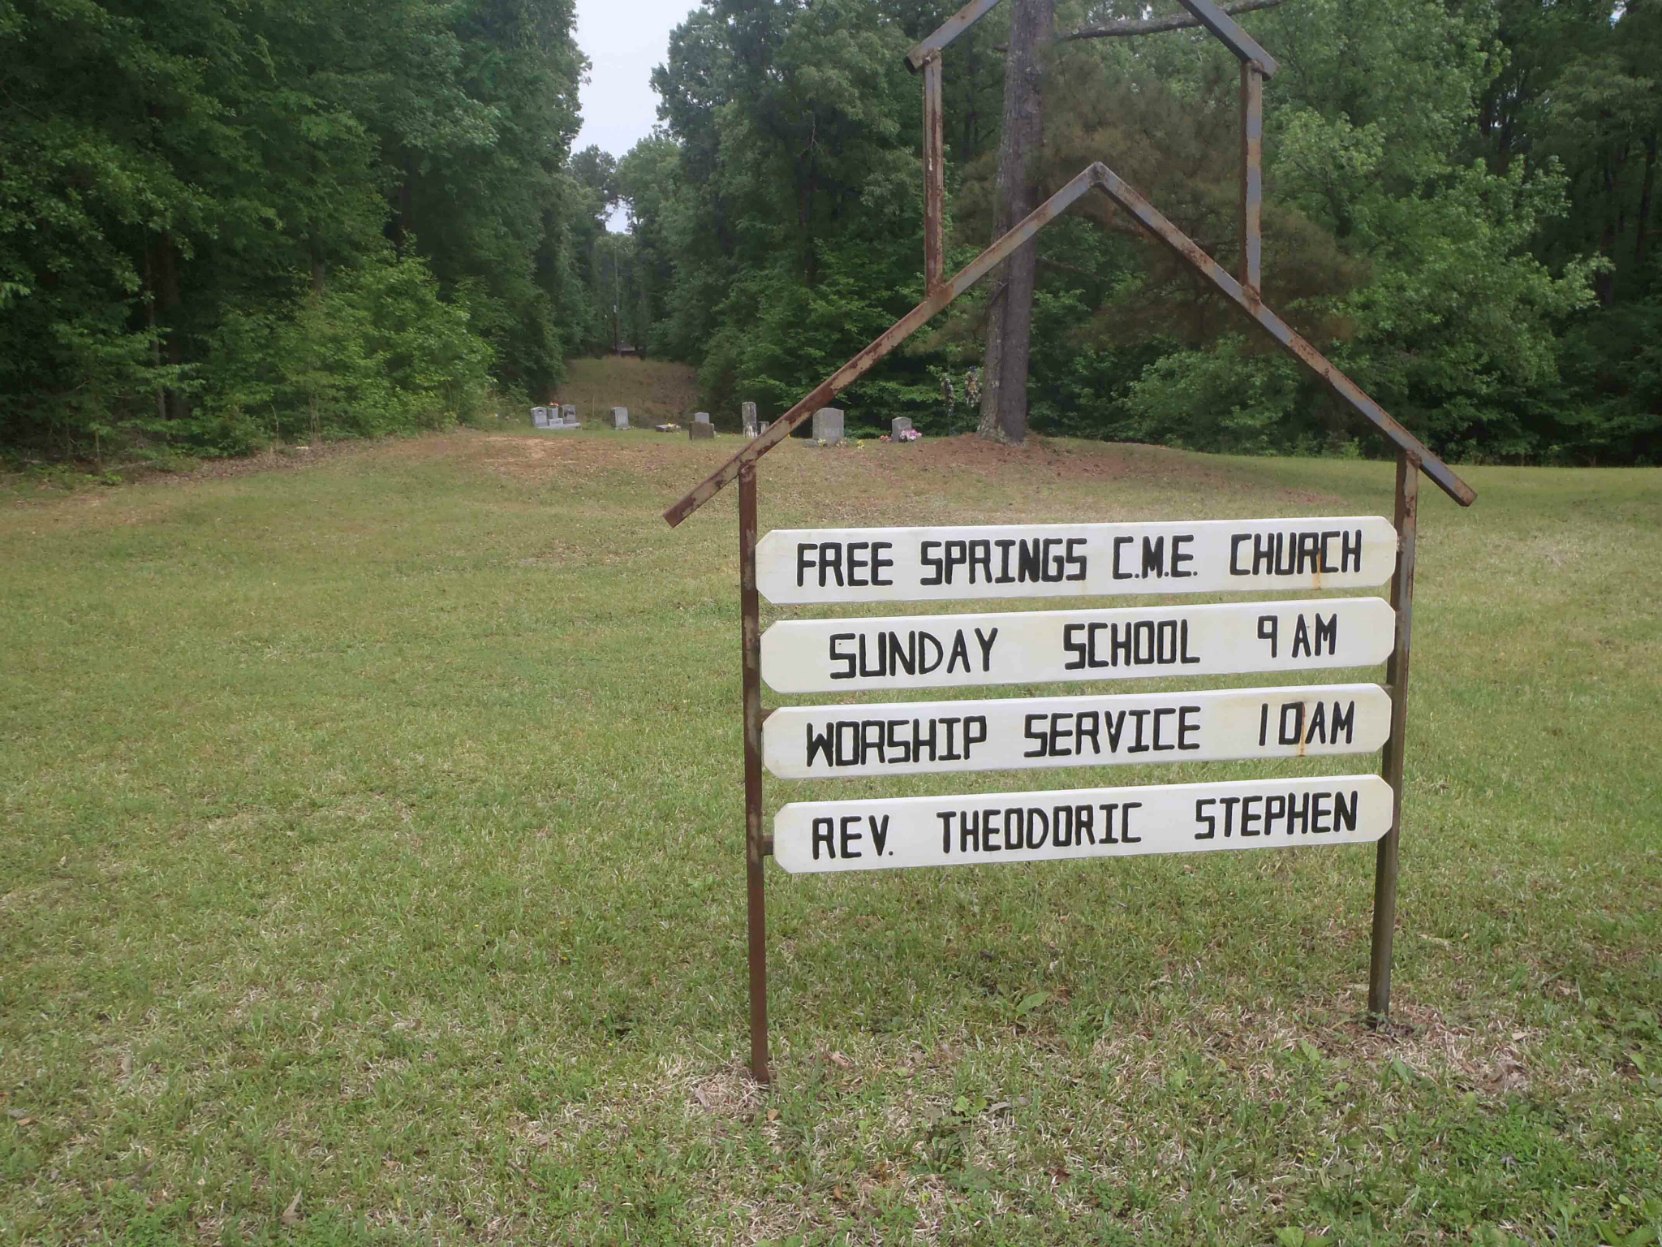 Free Springs C.M.E. Church sign as it appears from the road. R.L. Burnside's grave is in the cemetery visible behind the sign.